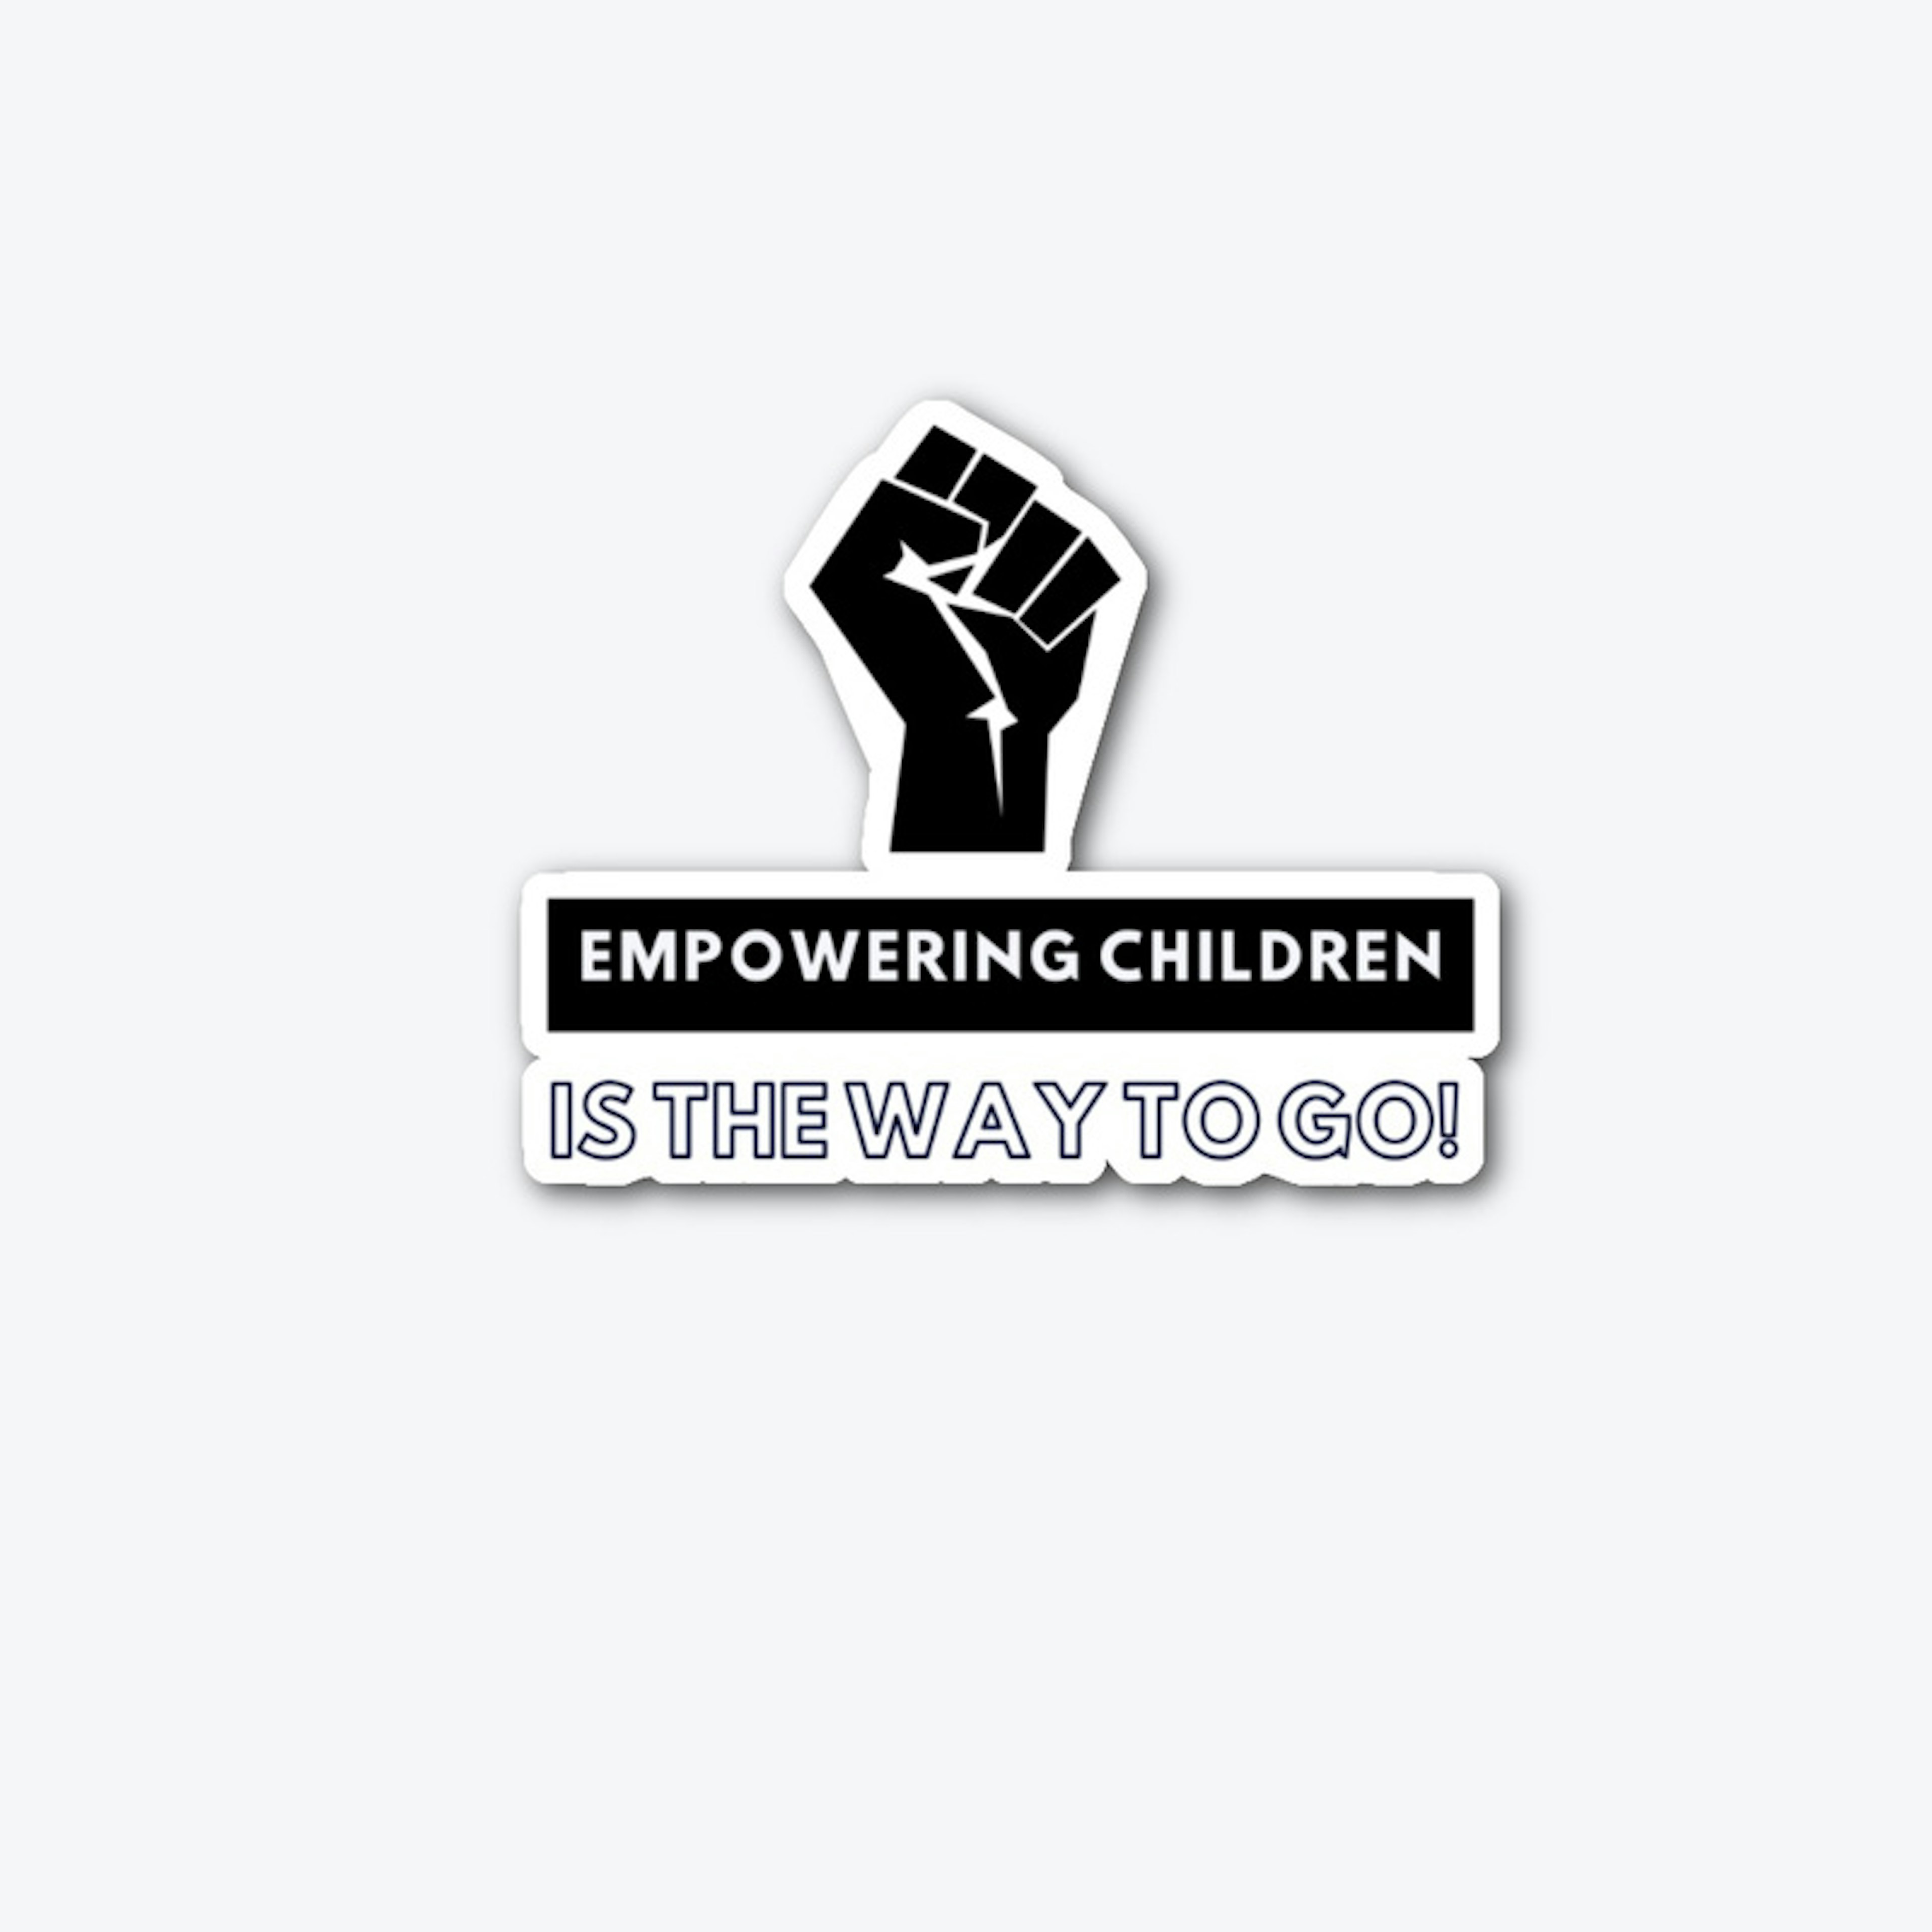 Empowering Children is the Way to Go!